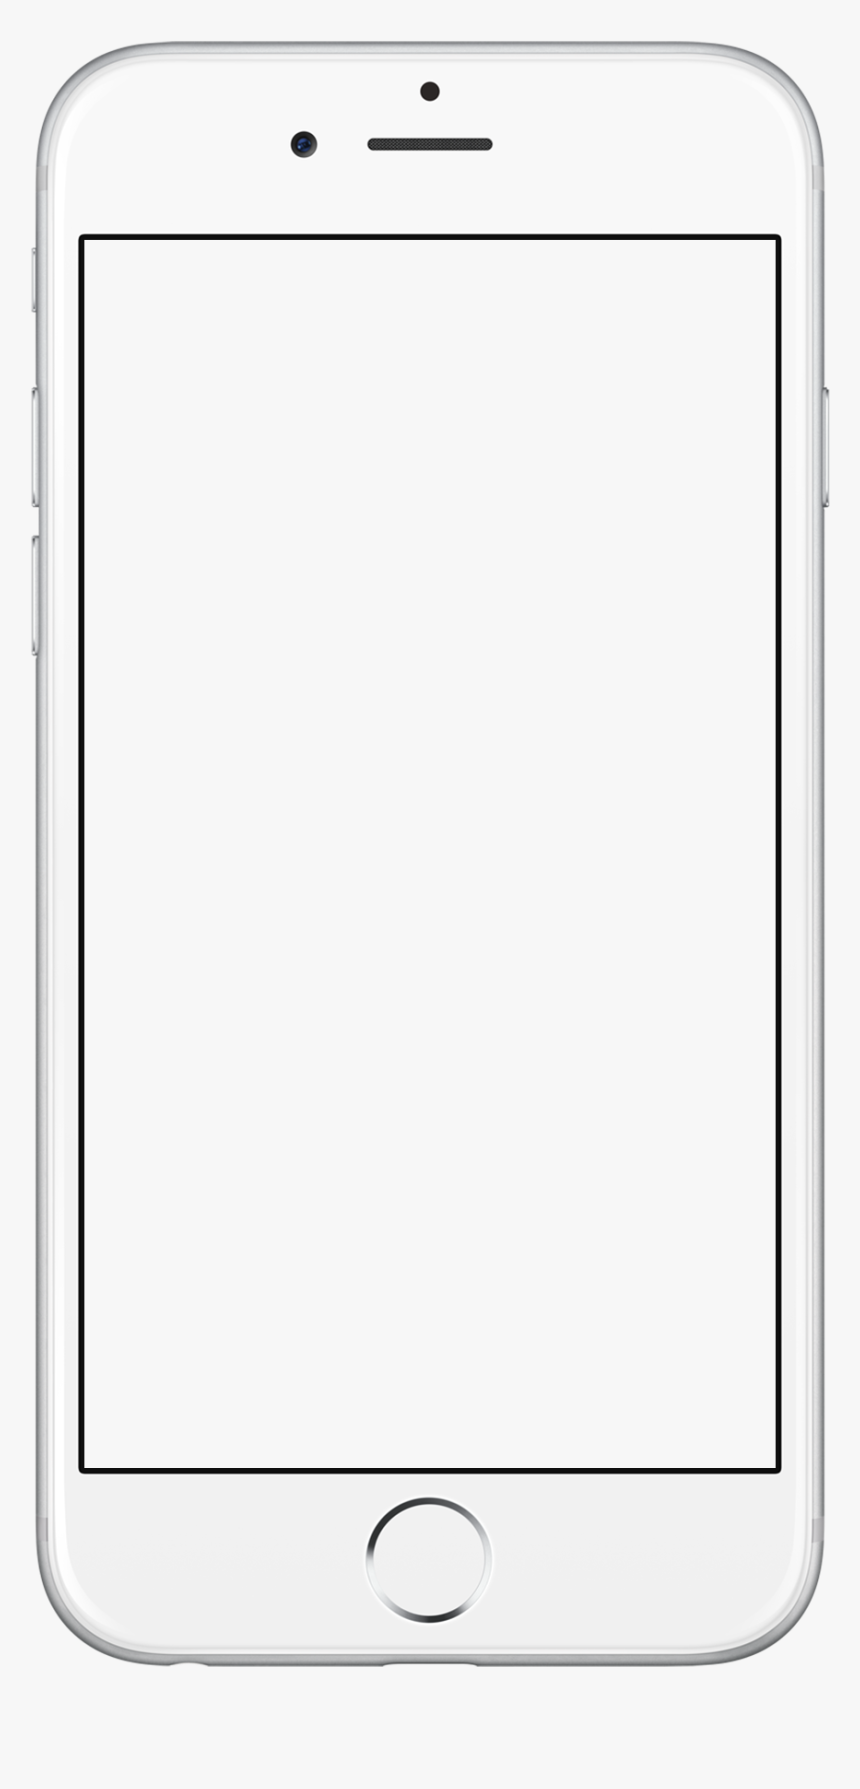 Iphone 5s Wikipedia, HD Png Download, Free Download